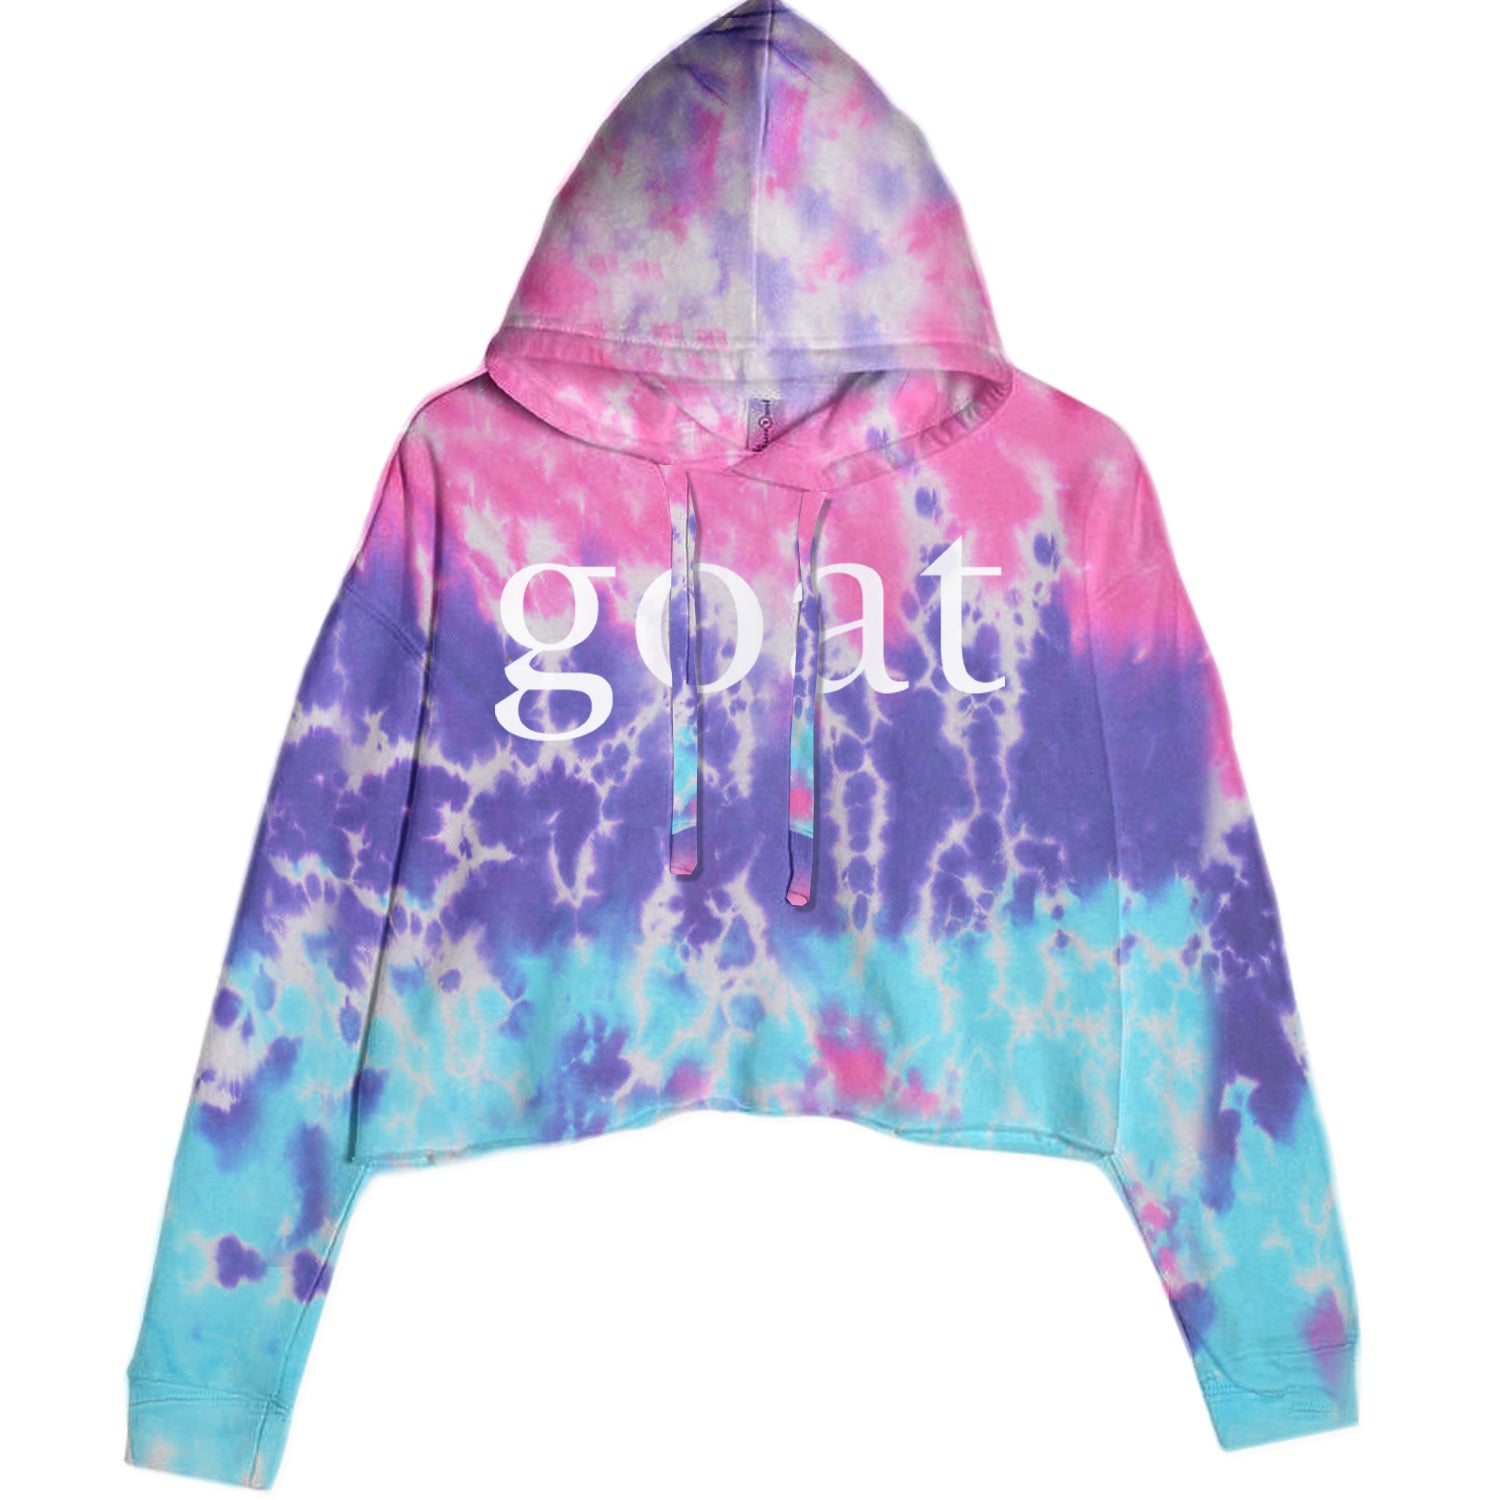 GOAT - Greatest Of All Time  Cropped Hoodie Sweatshirt Cotton Candy